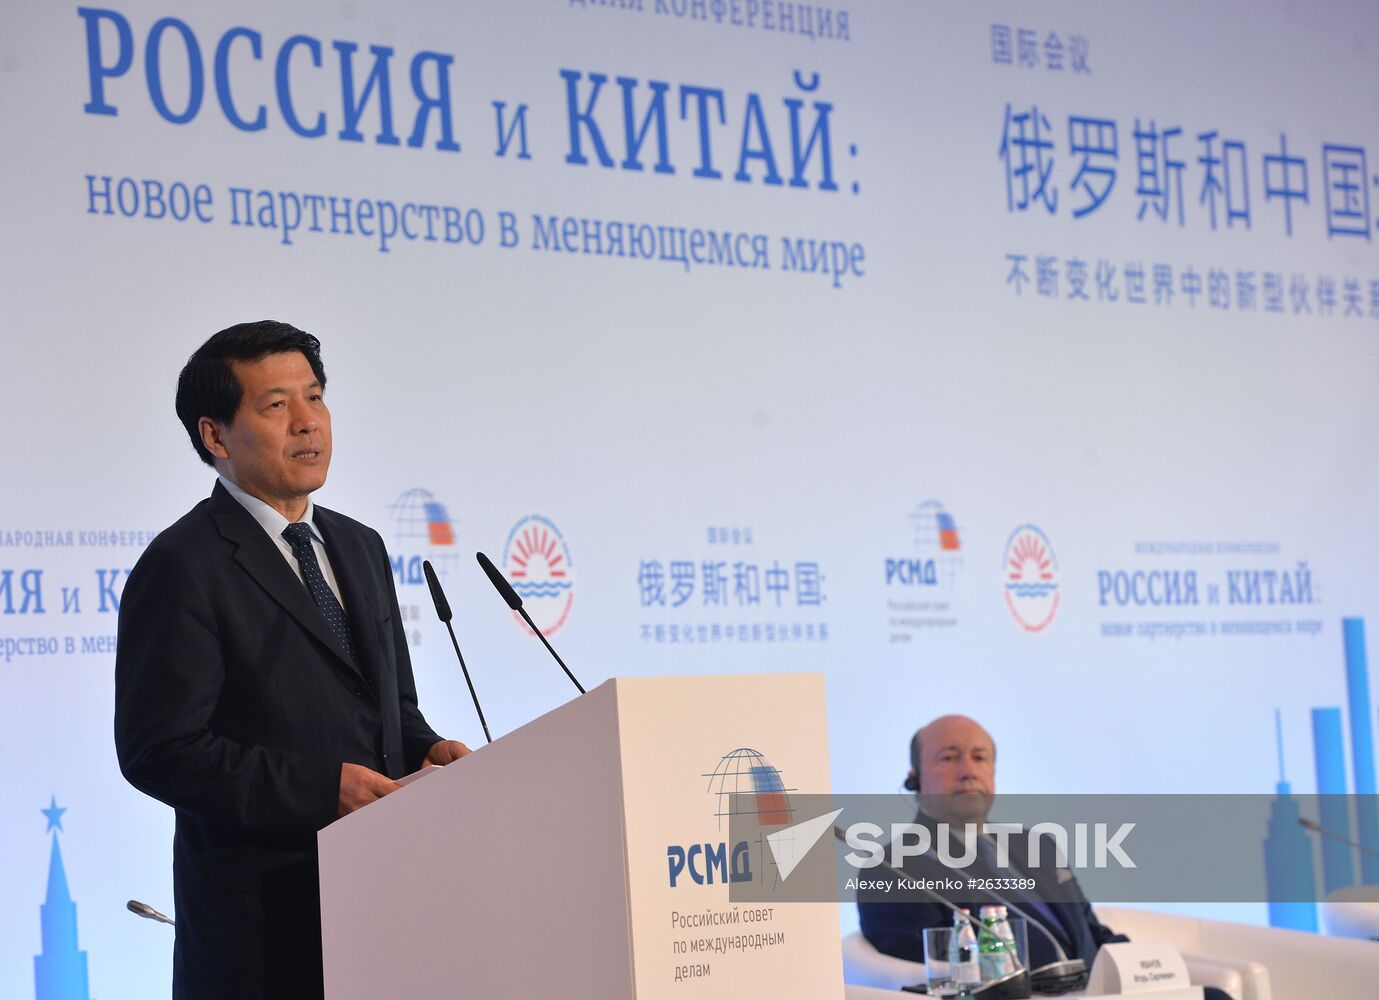 Russia and China: A New Partnership in a Changing World international conference